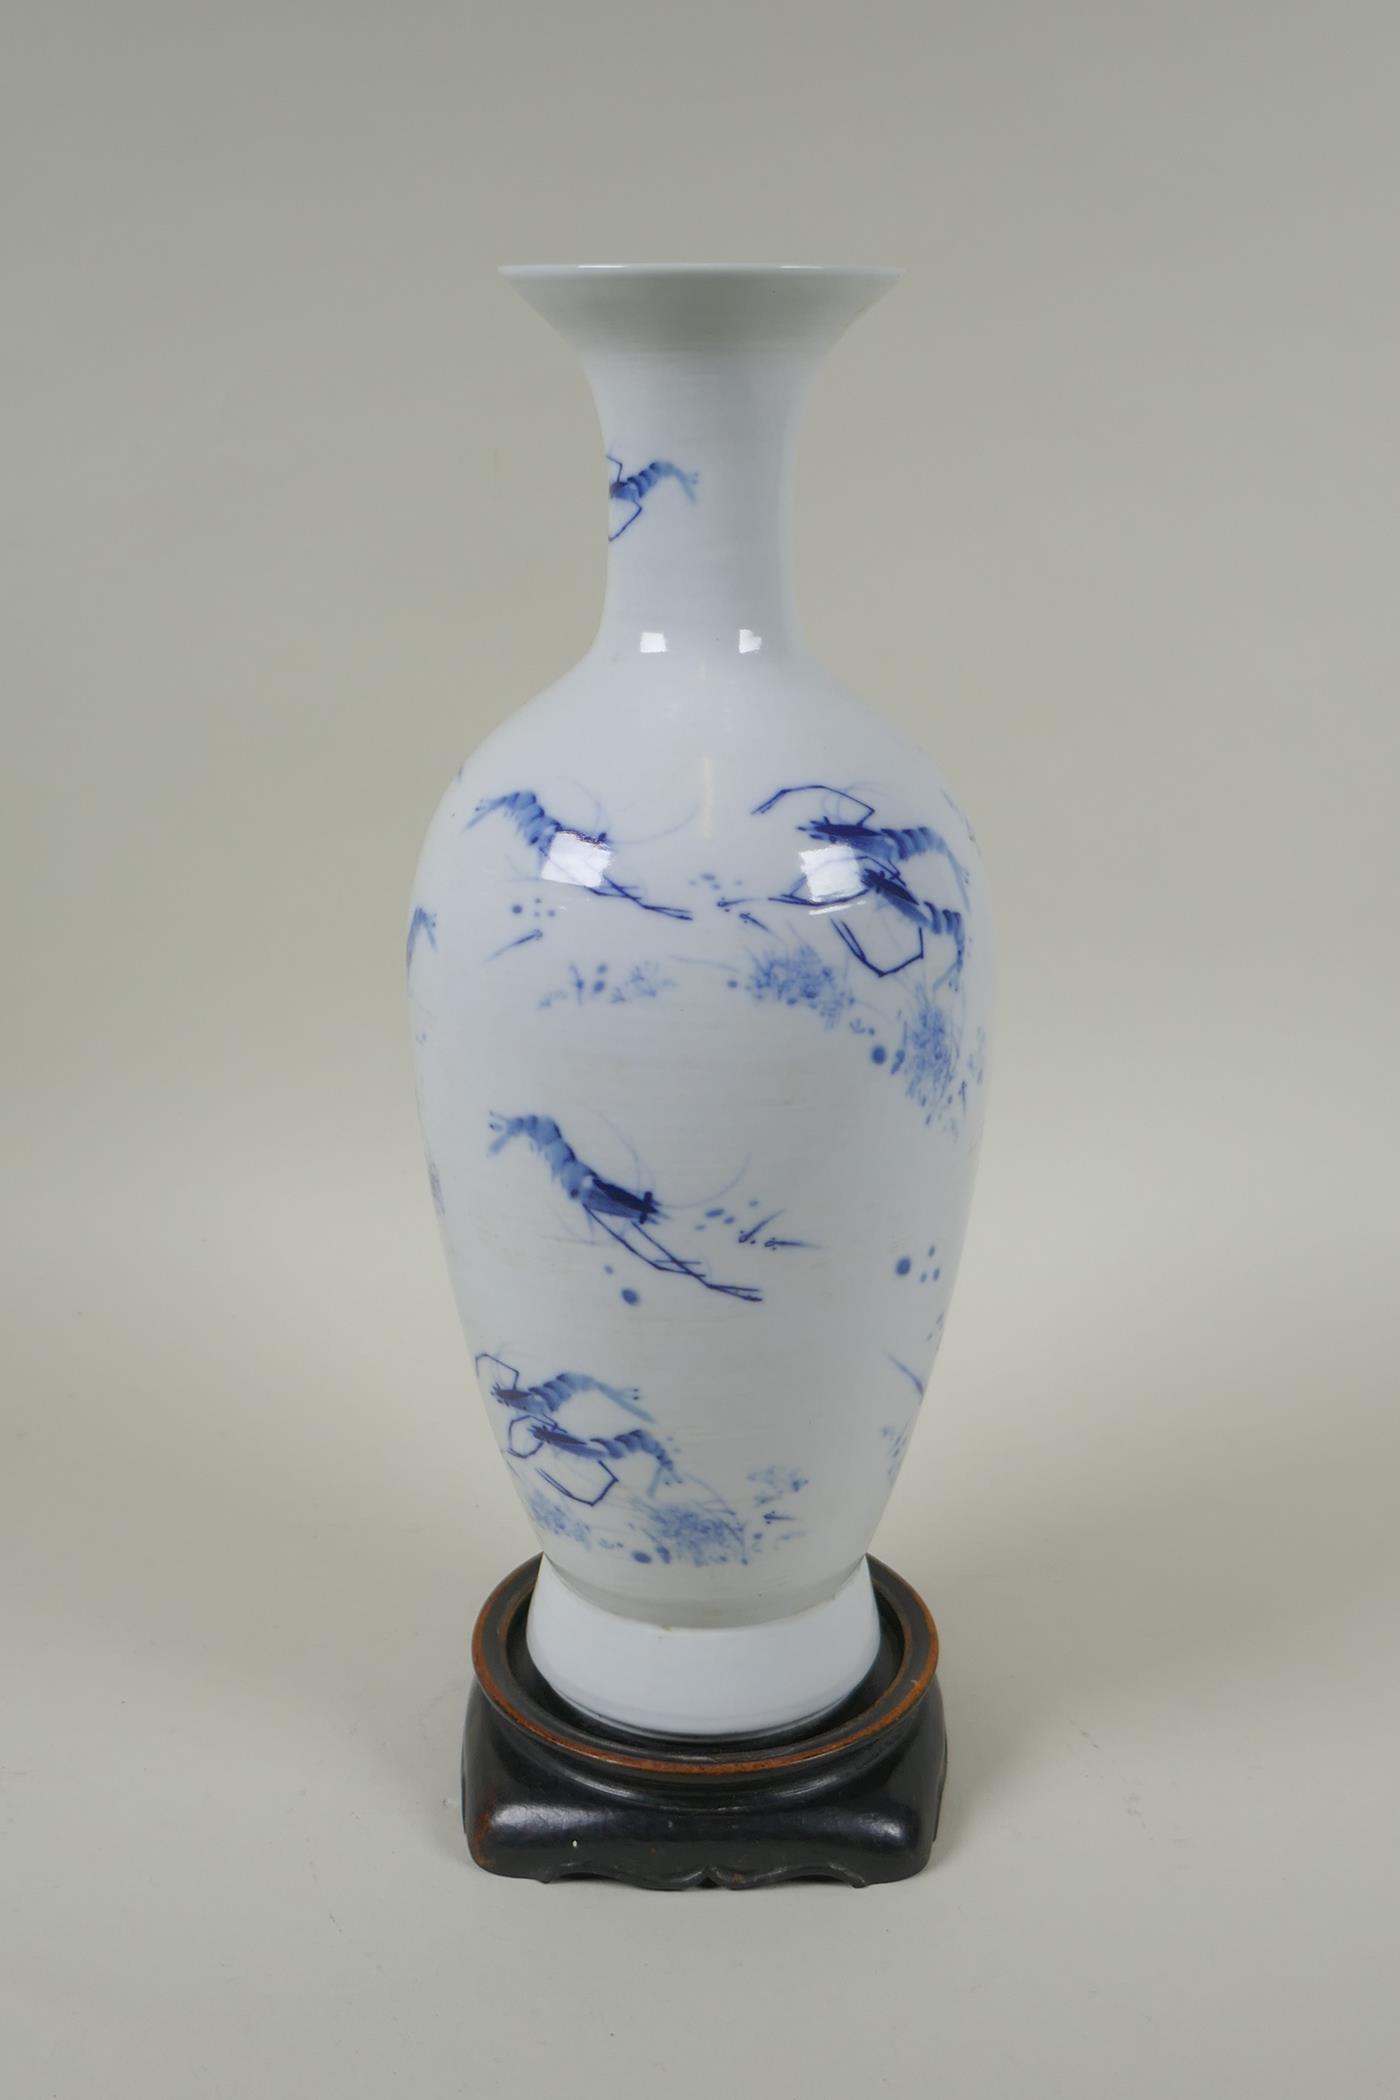 A Chinese blue and white porcelain vase decoration with king prawns, GuangXu 6 character mark to - Image 3 of 5